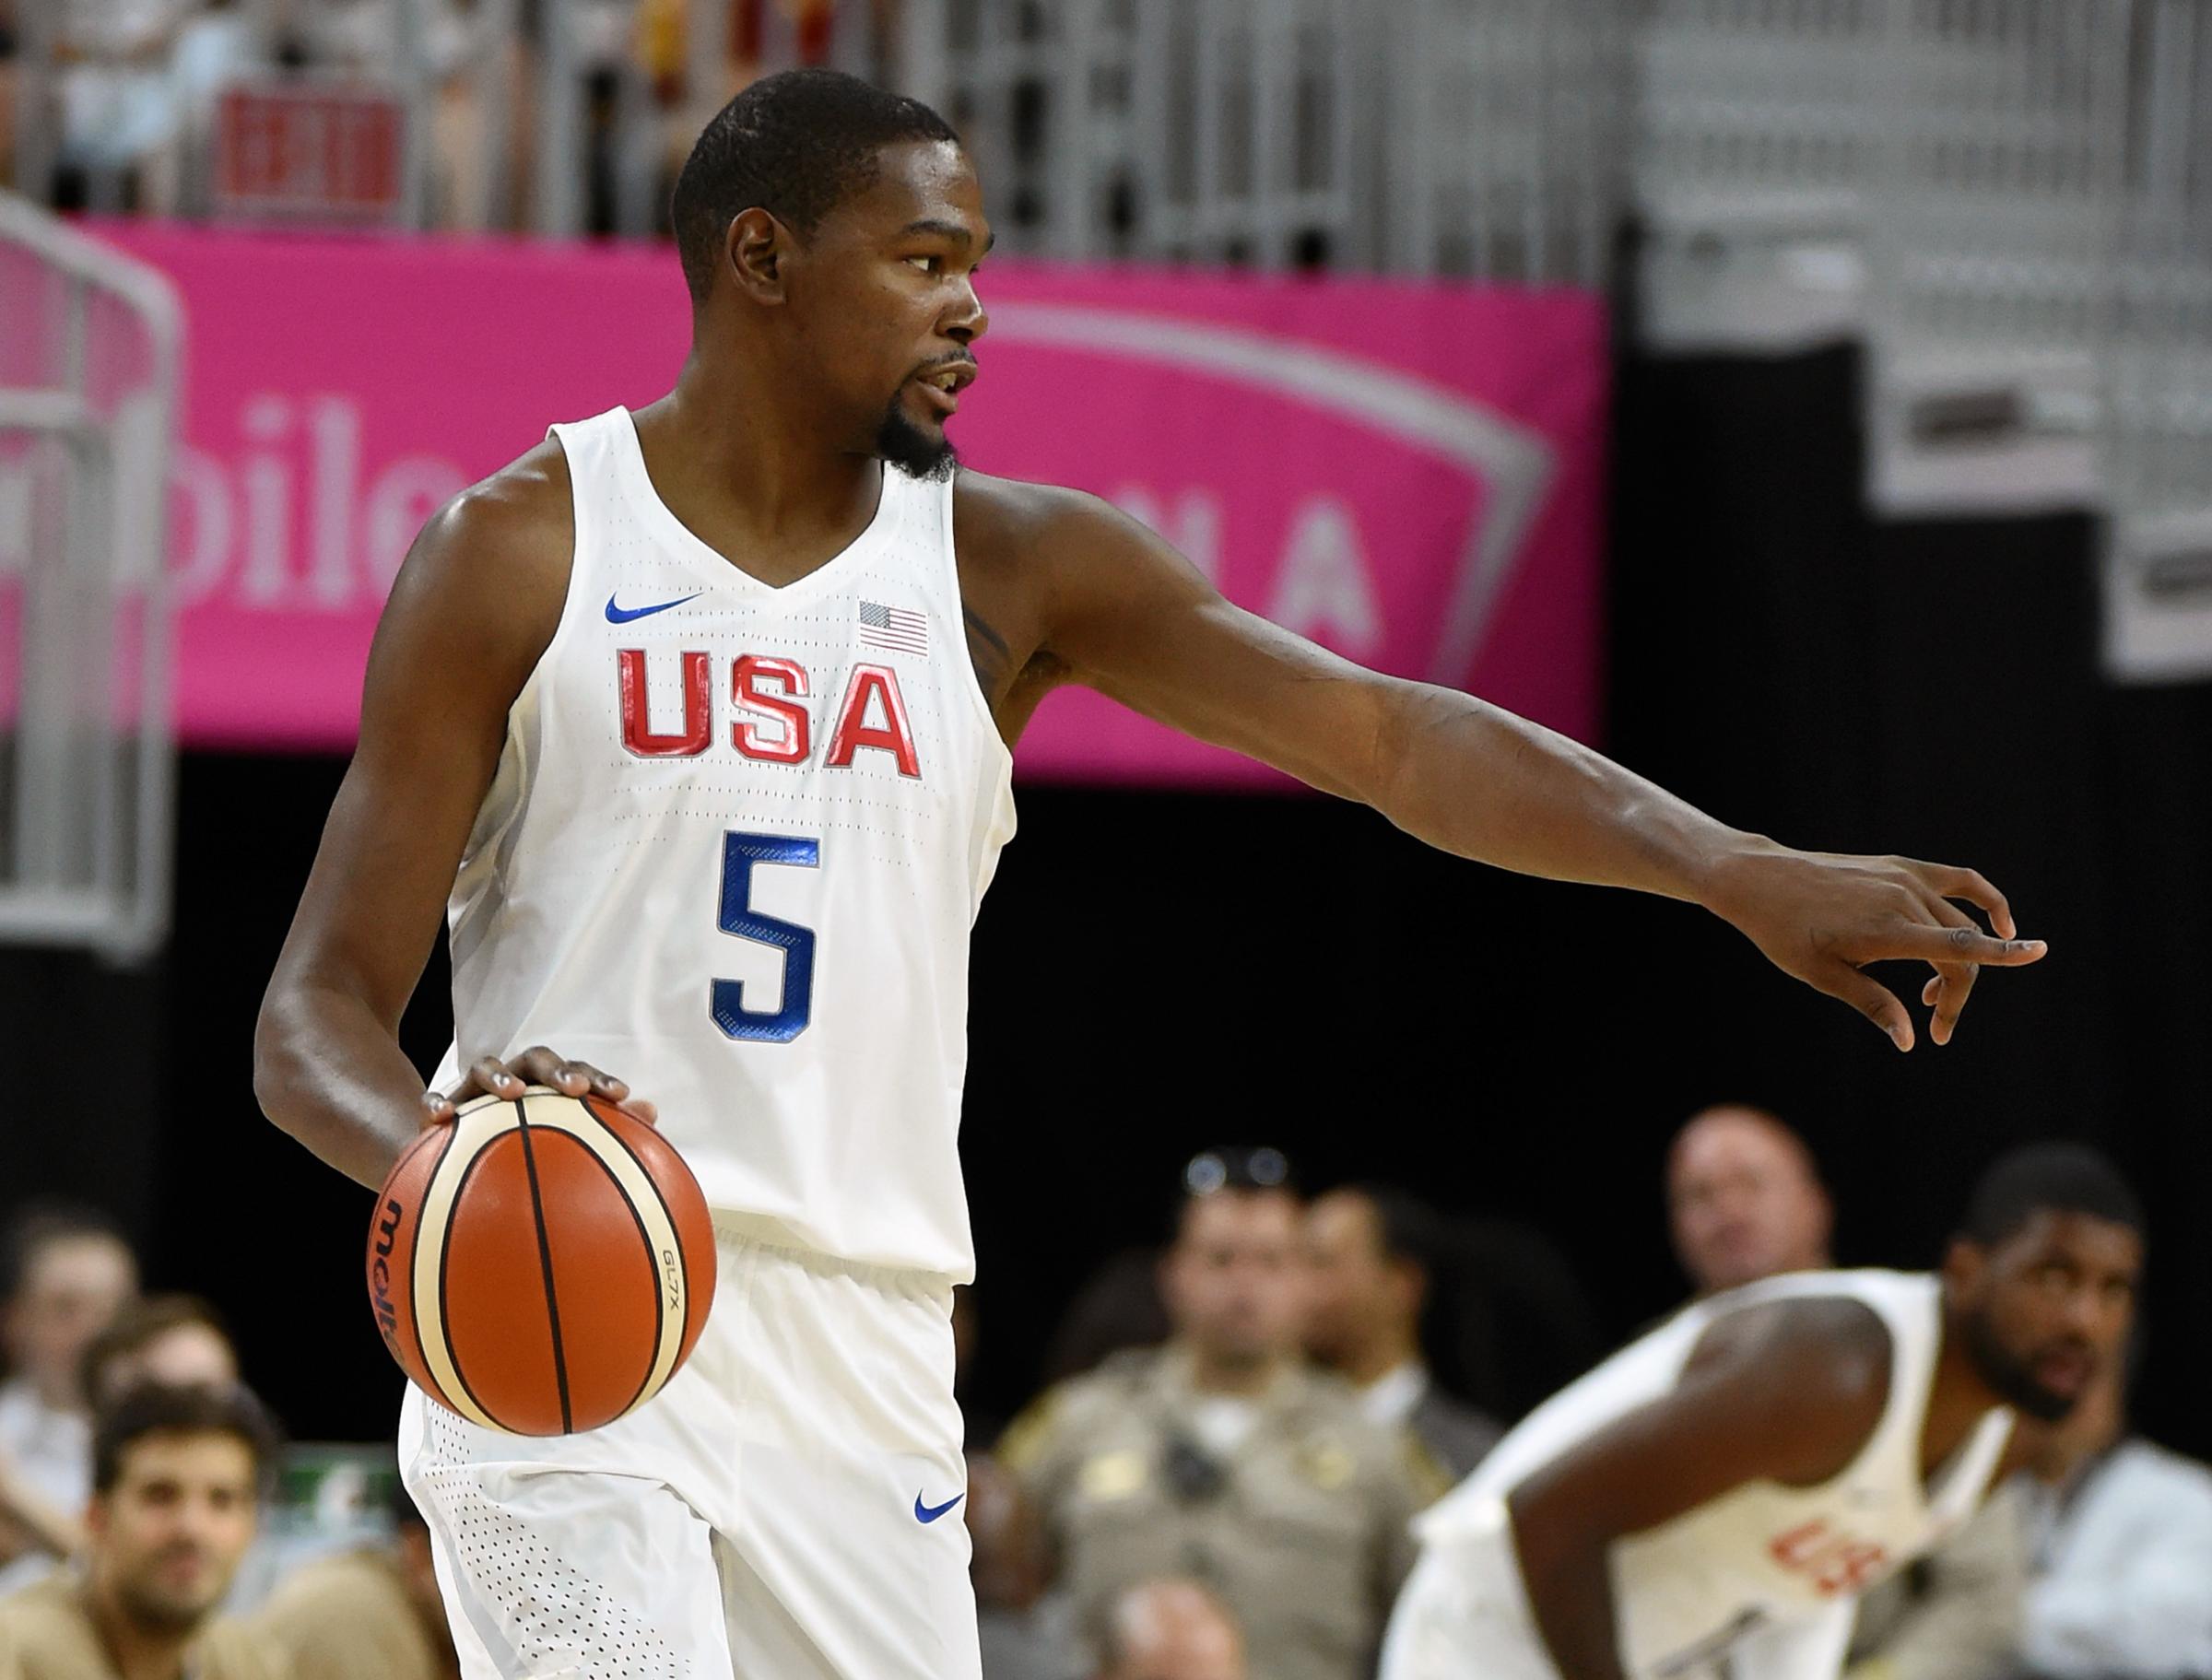 Kevin Durant—Durant is the rare NBA megastar who hasn’t bowed out of Rio. With future Golden State teammates Klay Thompson and Draymond Green, he’ll try to fend off Pau Gasol–led Spain for the Americans’ third straight gold.